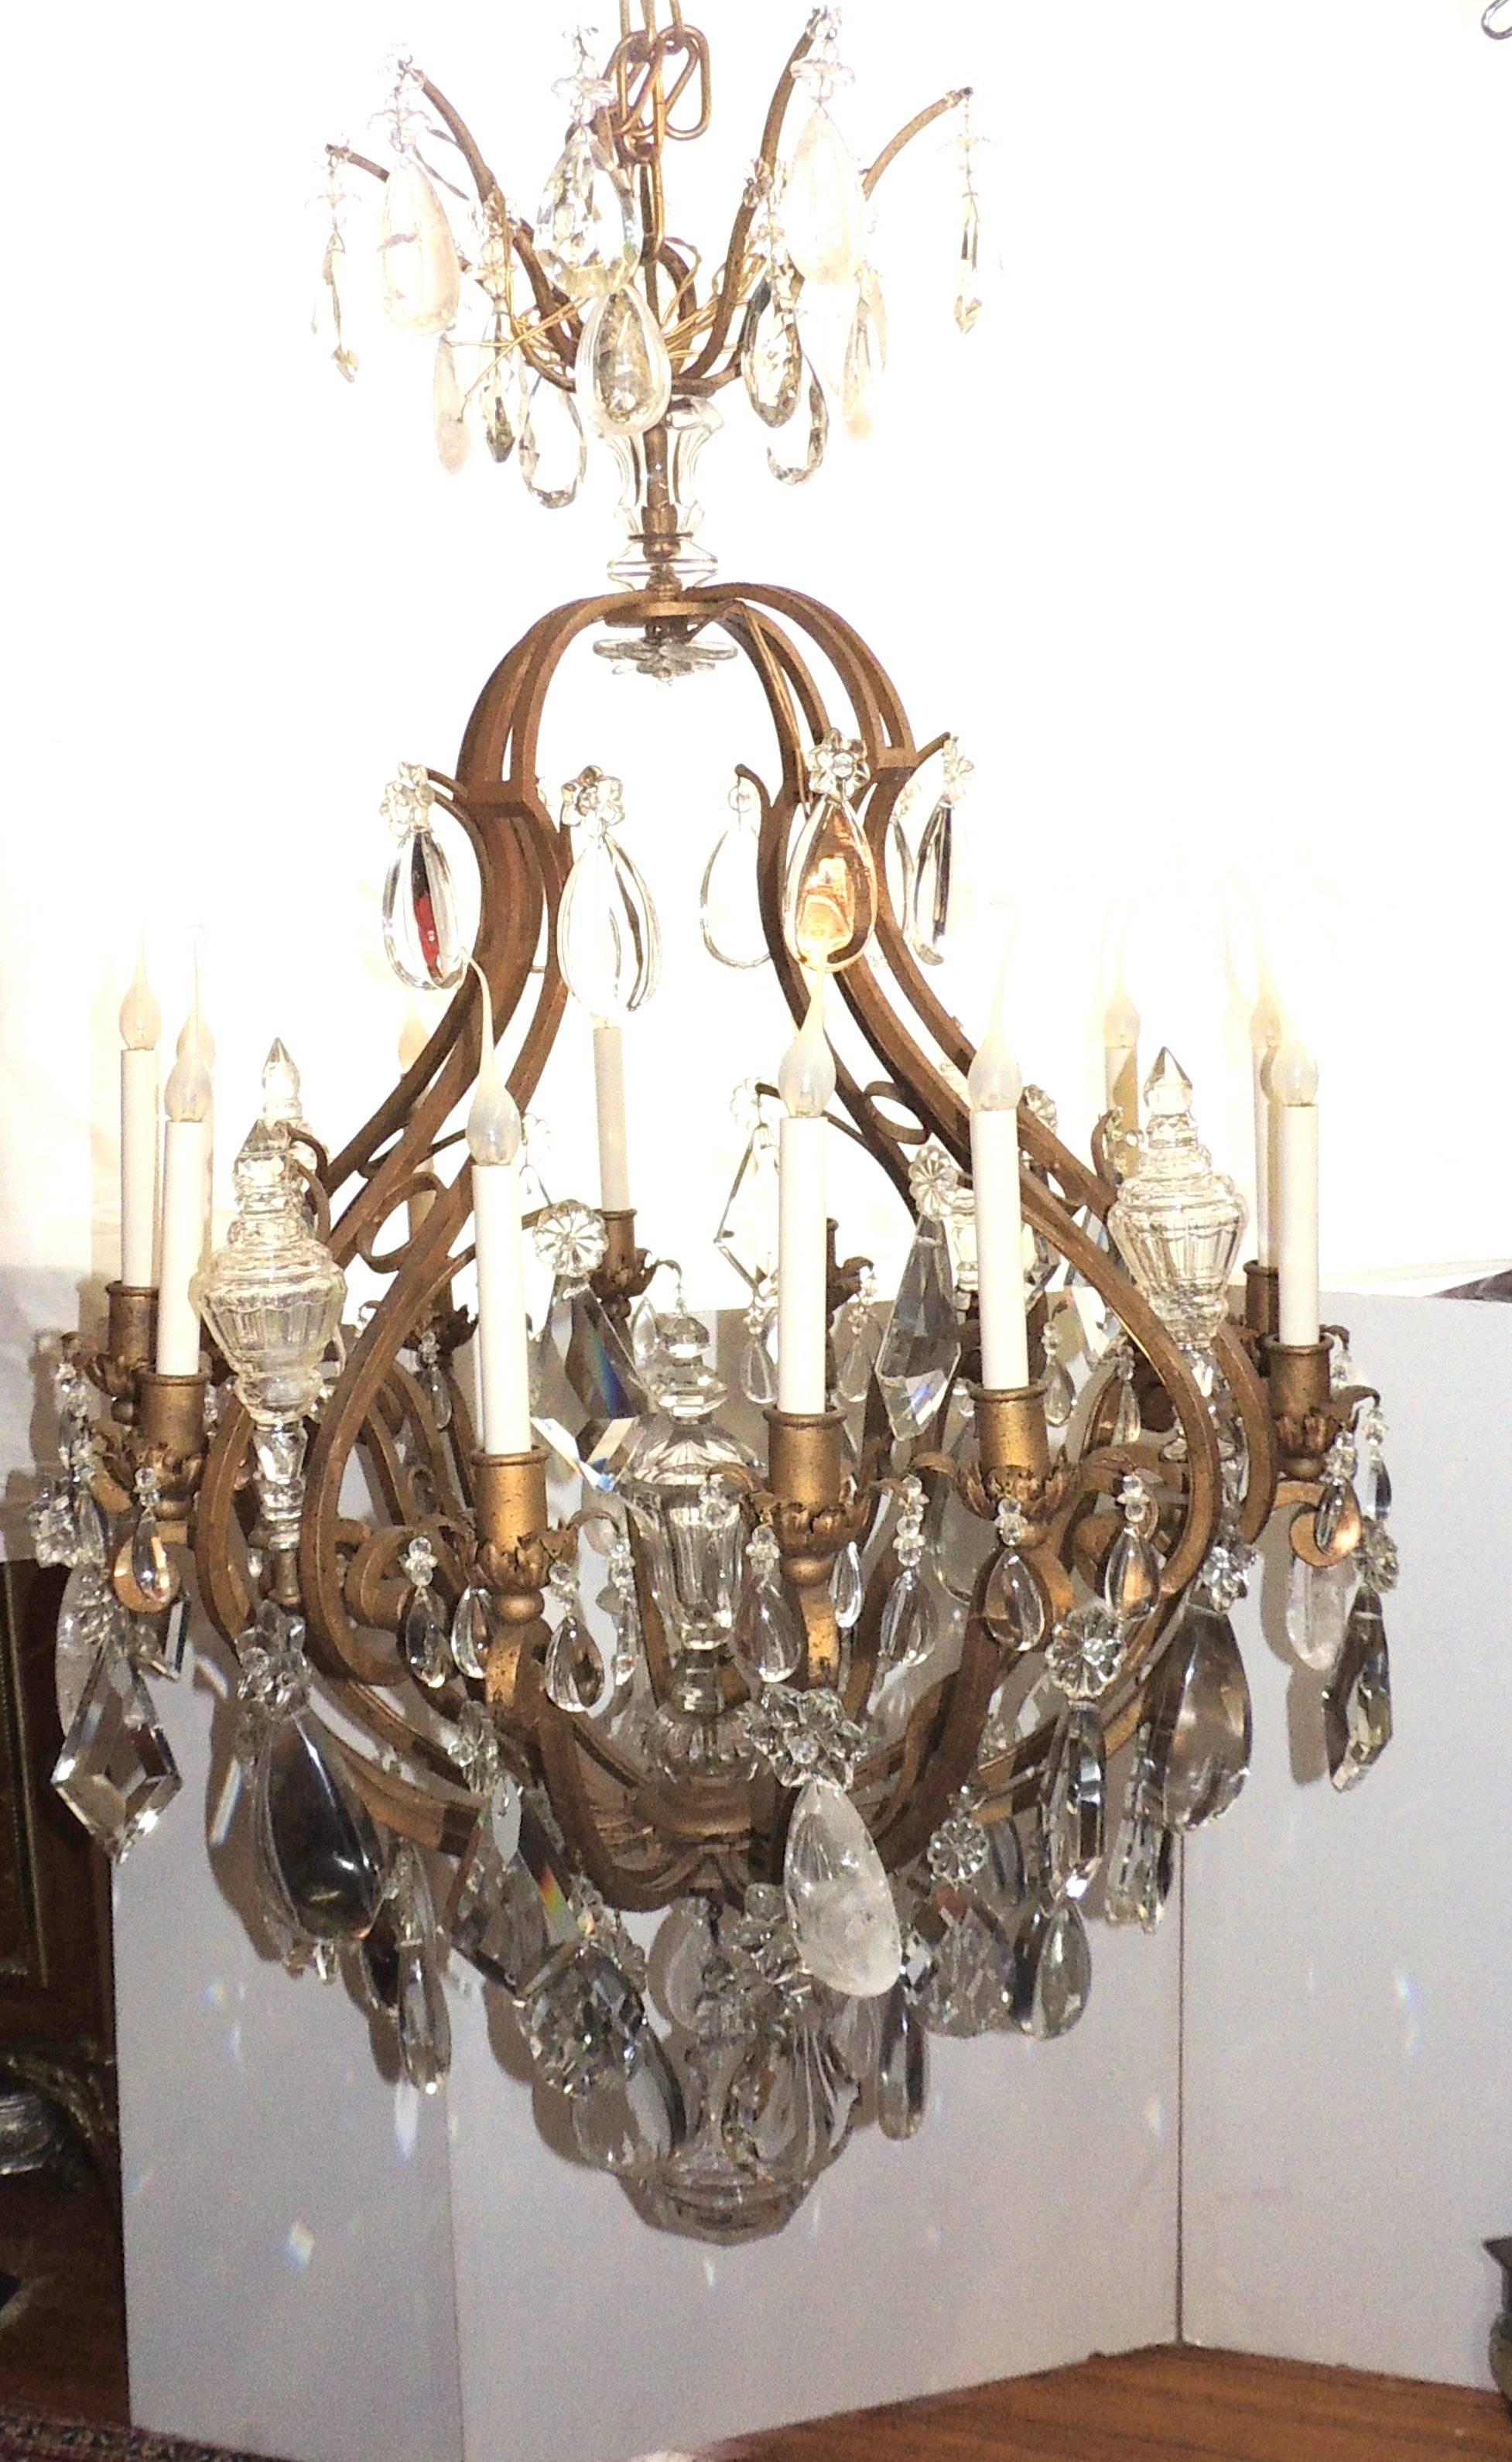 This wonderful very large 1920s gilt iron French cage chandelier has twelve lights with an assortment of flat, prism, faceted and rock crystals finished with a large beveled ball at the bottom. In the Baguès manner

Measures: 55